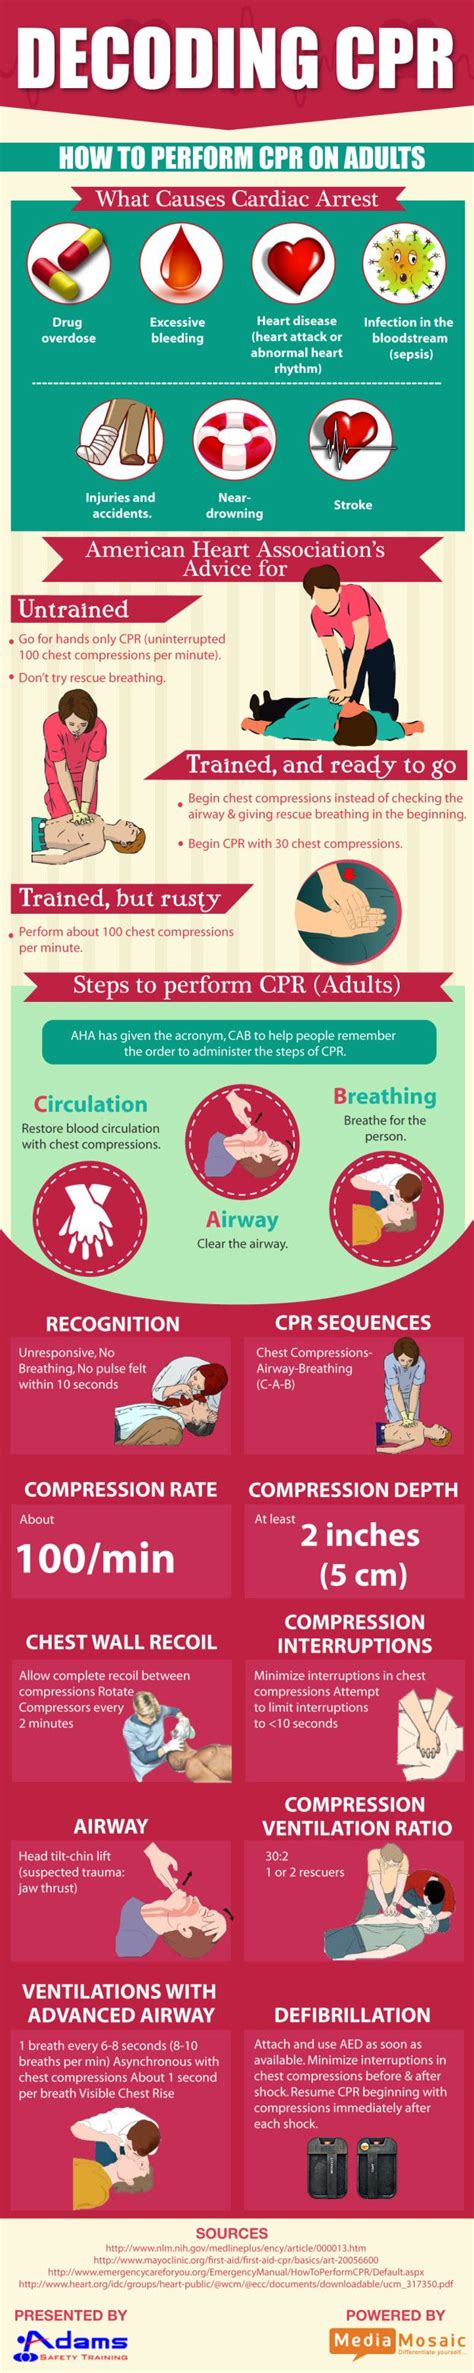 87 best images about adult cpr and first aid on pinterest